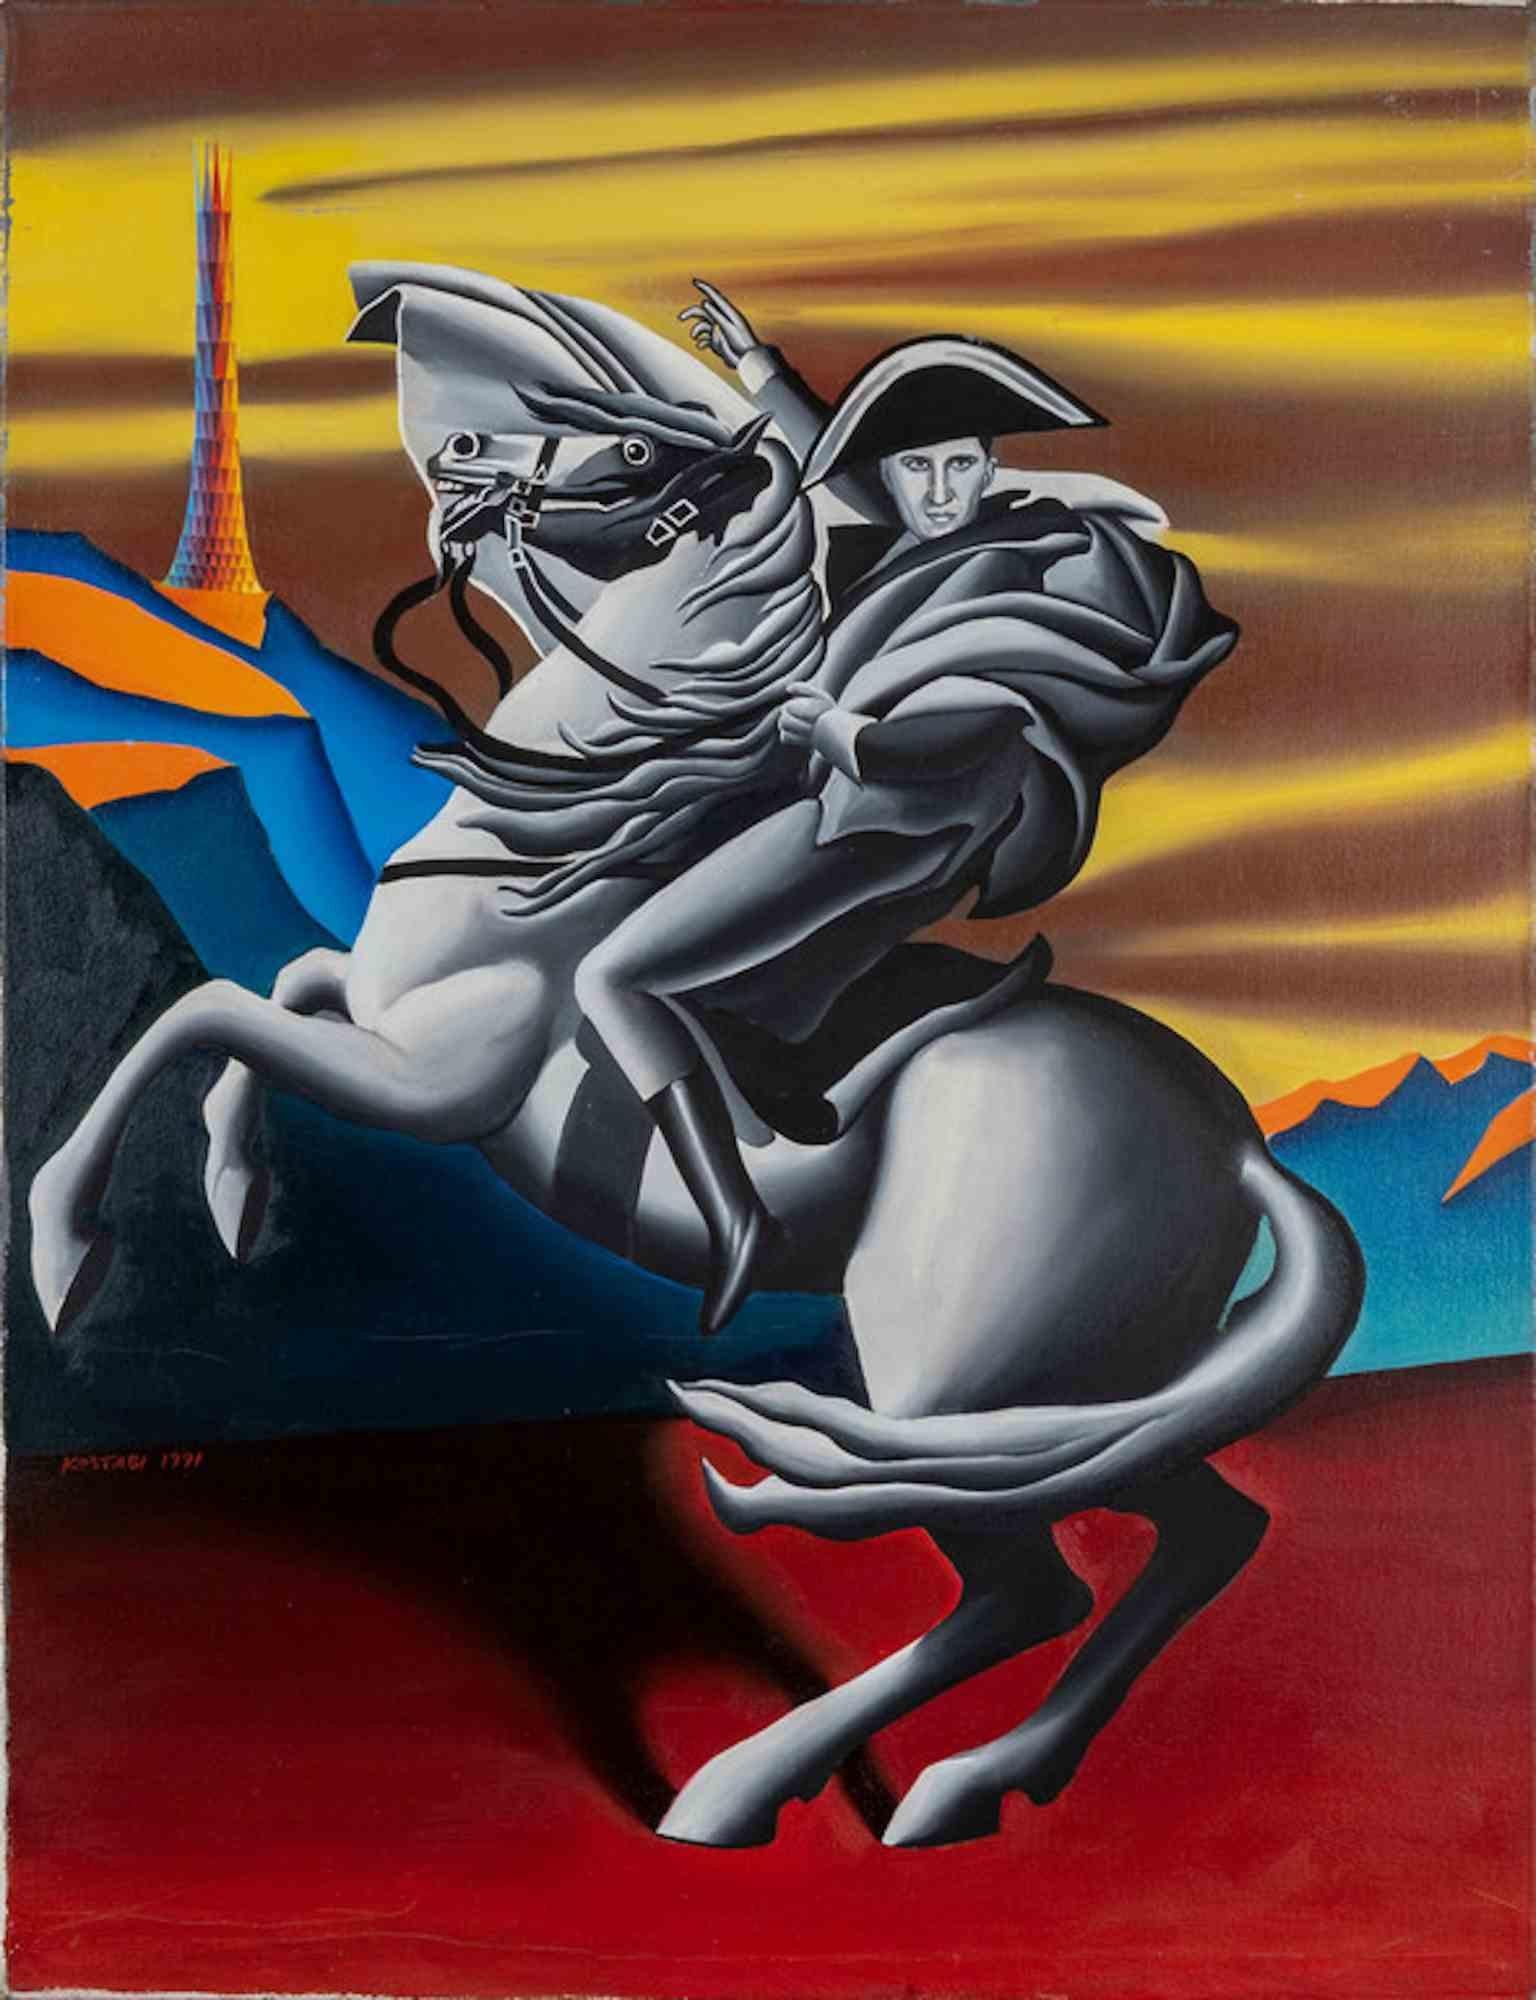 Excelsior is an oil painting on canvas realized by Mark Kostabi in 1991.
Hand-signed and dated on the lower left
Also signed, dated and titled on the rear.
With the label "Galleria di Caterina Gualco Genova" on the rear.
Certificate by the artist on